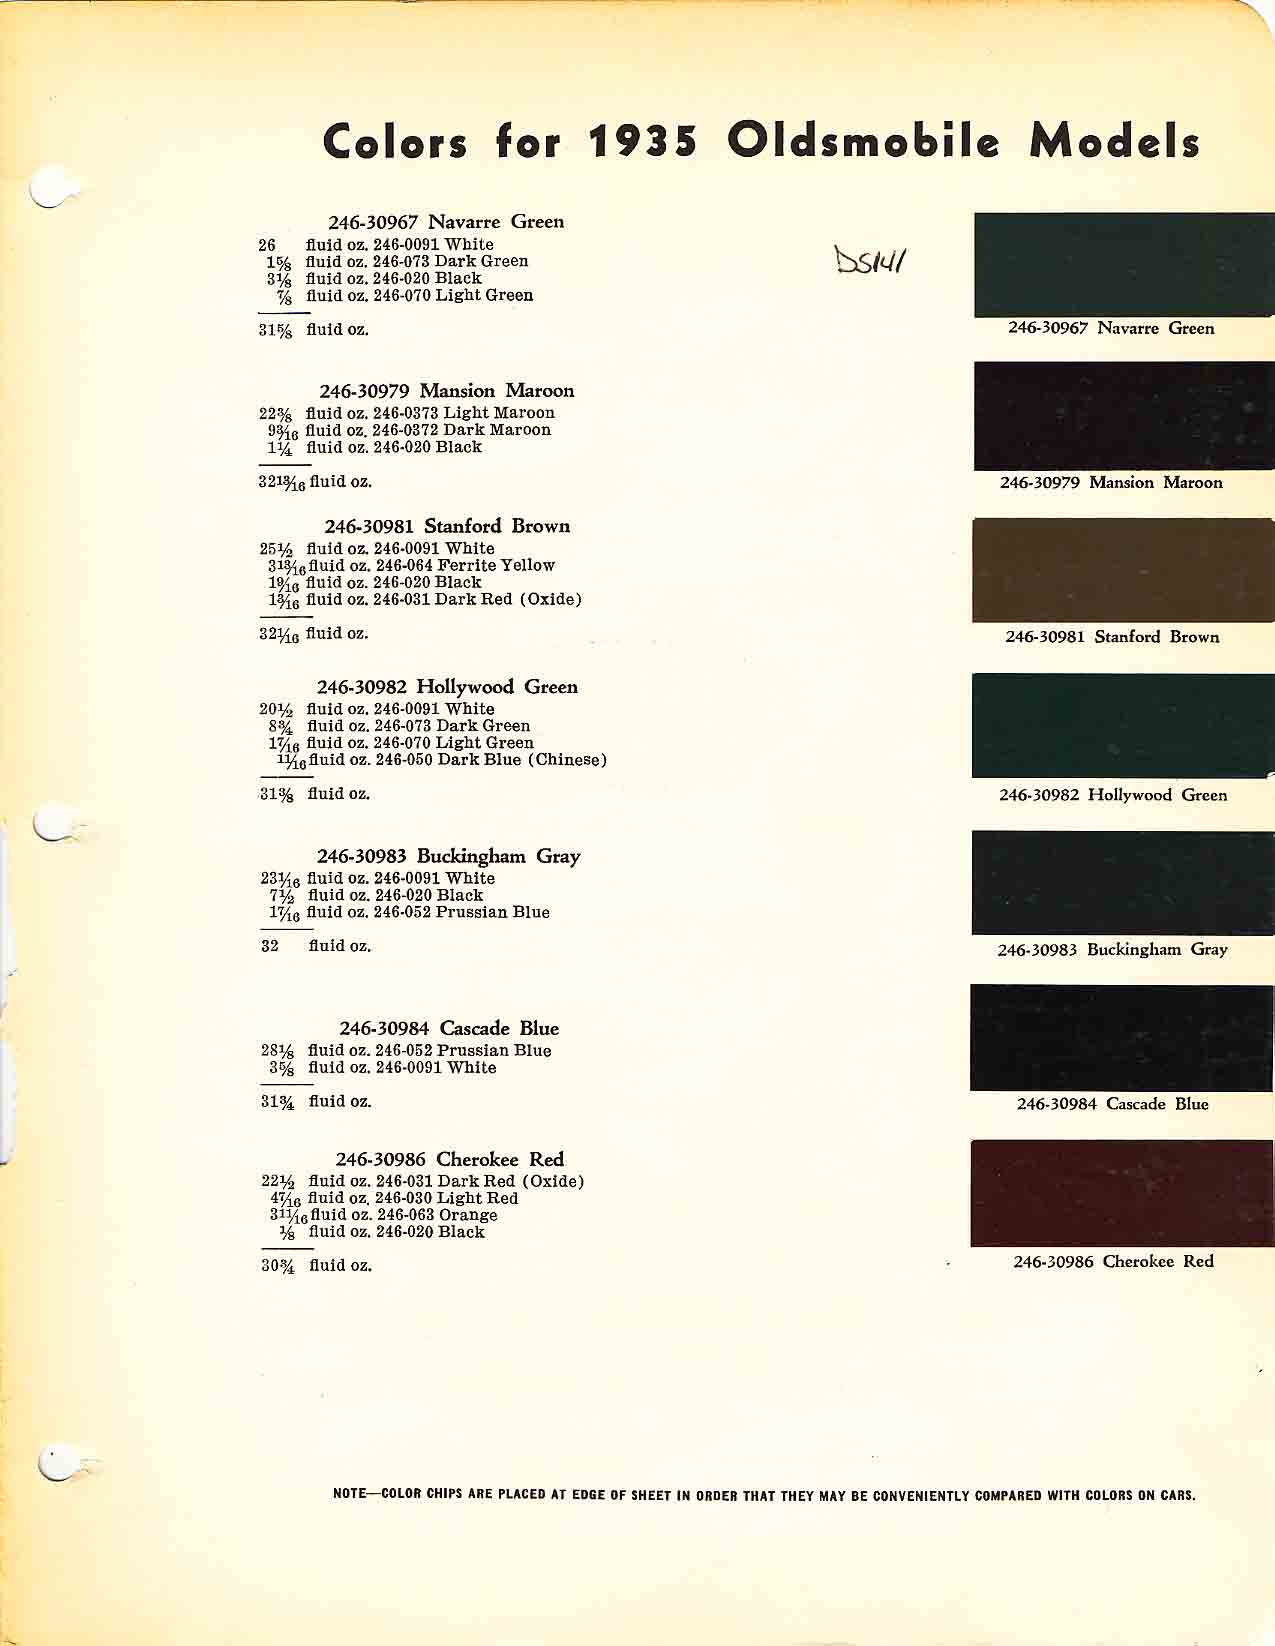 Colors and codes used on Oldsmobile Vehicles in 1935